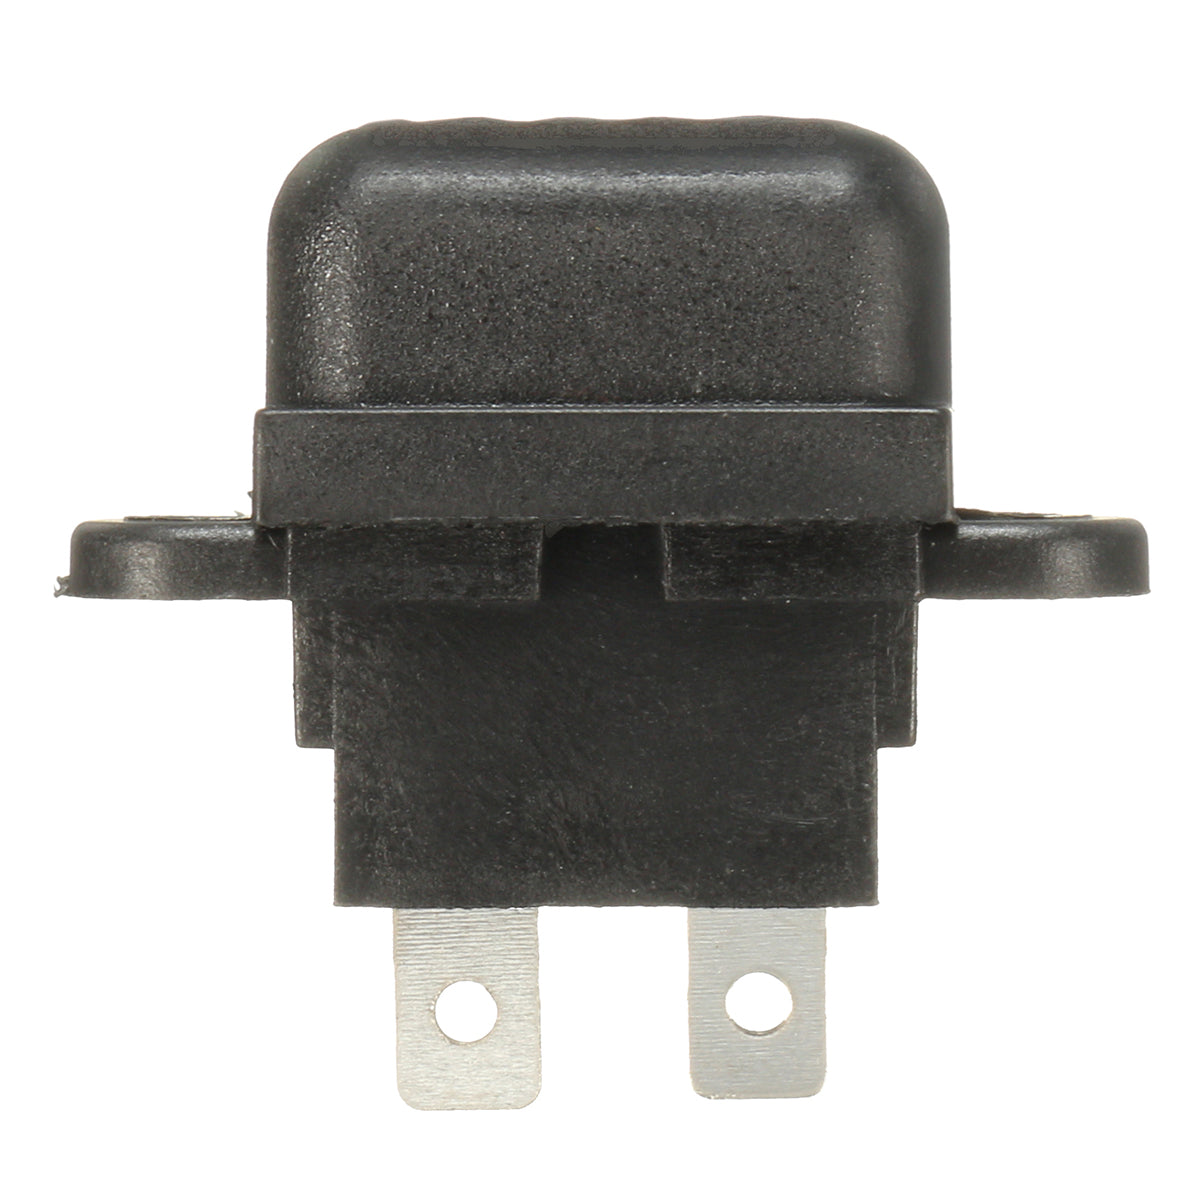 Dark Slate Gray 5Pcs 30A Amp Auto Blade Standard Fuse Holder Box For Car Boat Truck With Cover